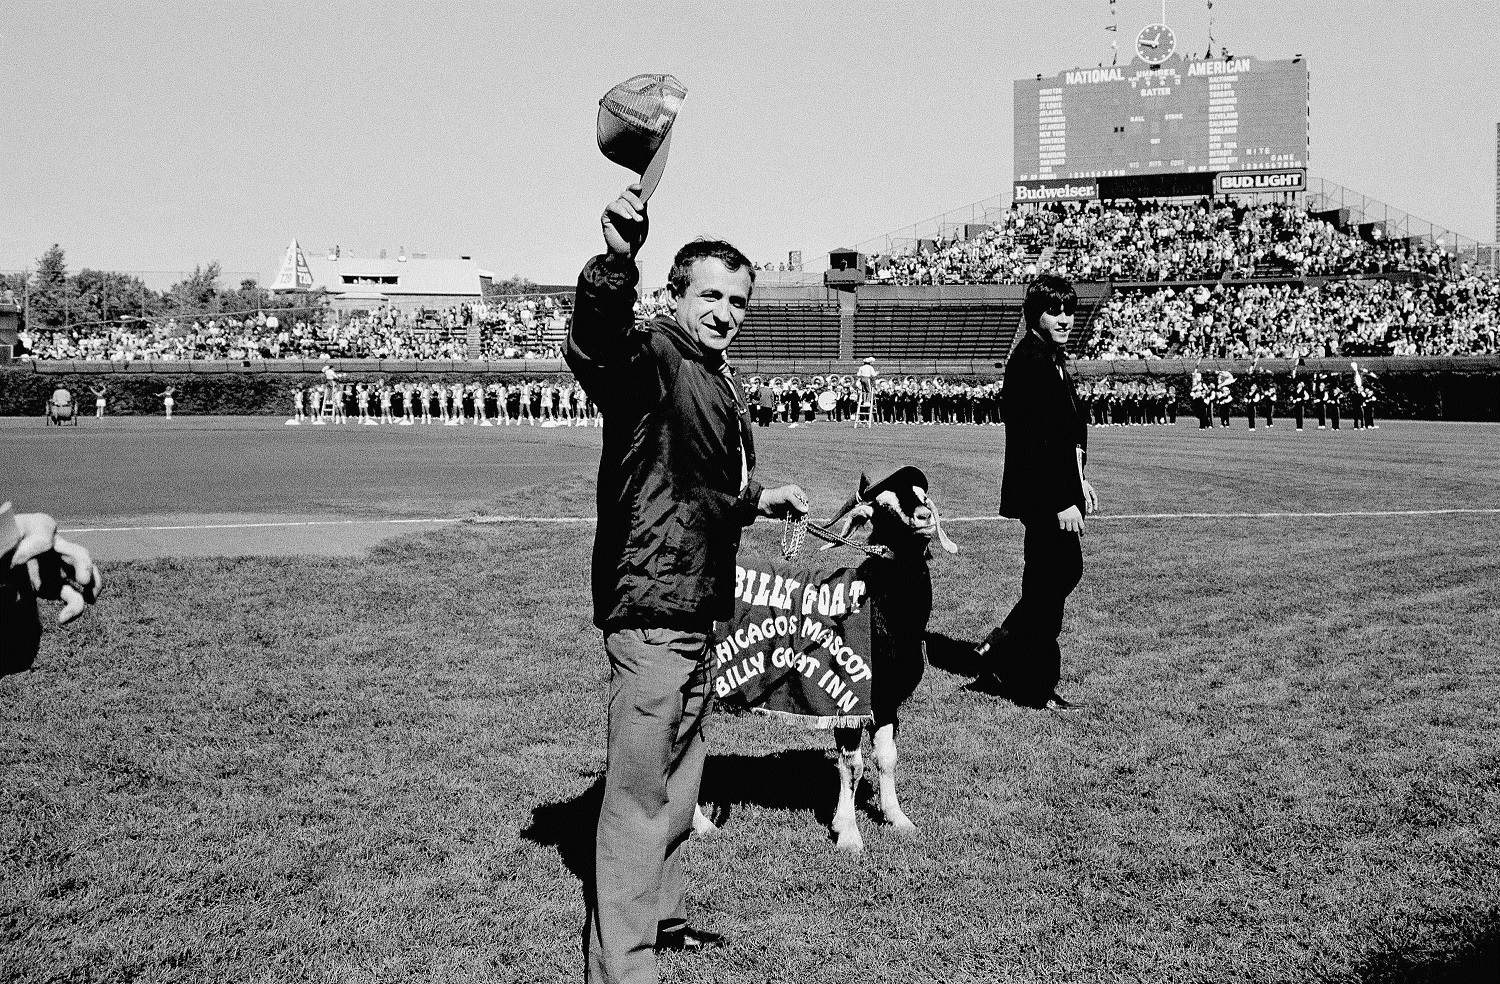 Sam Sianis, owner of the Billy Goat Tavern in Chicago, center, acknowledges the crowd along with his goat prior to the start of the National League playoff game between the Padres and the Cubs, Tuesday, Oct. 2, 1984, Chicago, Ill. Sianis and the goat were invited as guests of the Cubs, both begin issued tickets. The man on the right is unidentified. (AP Photo)